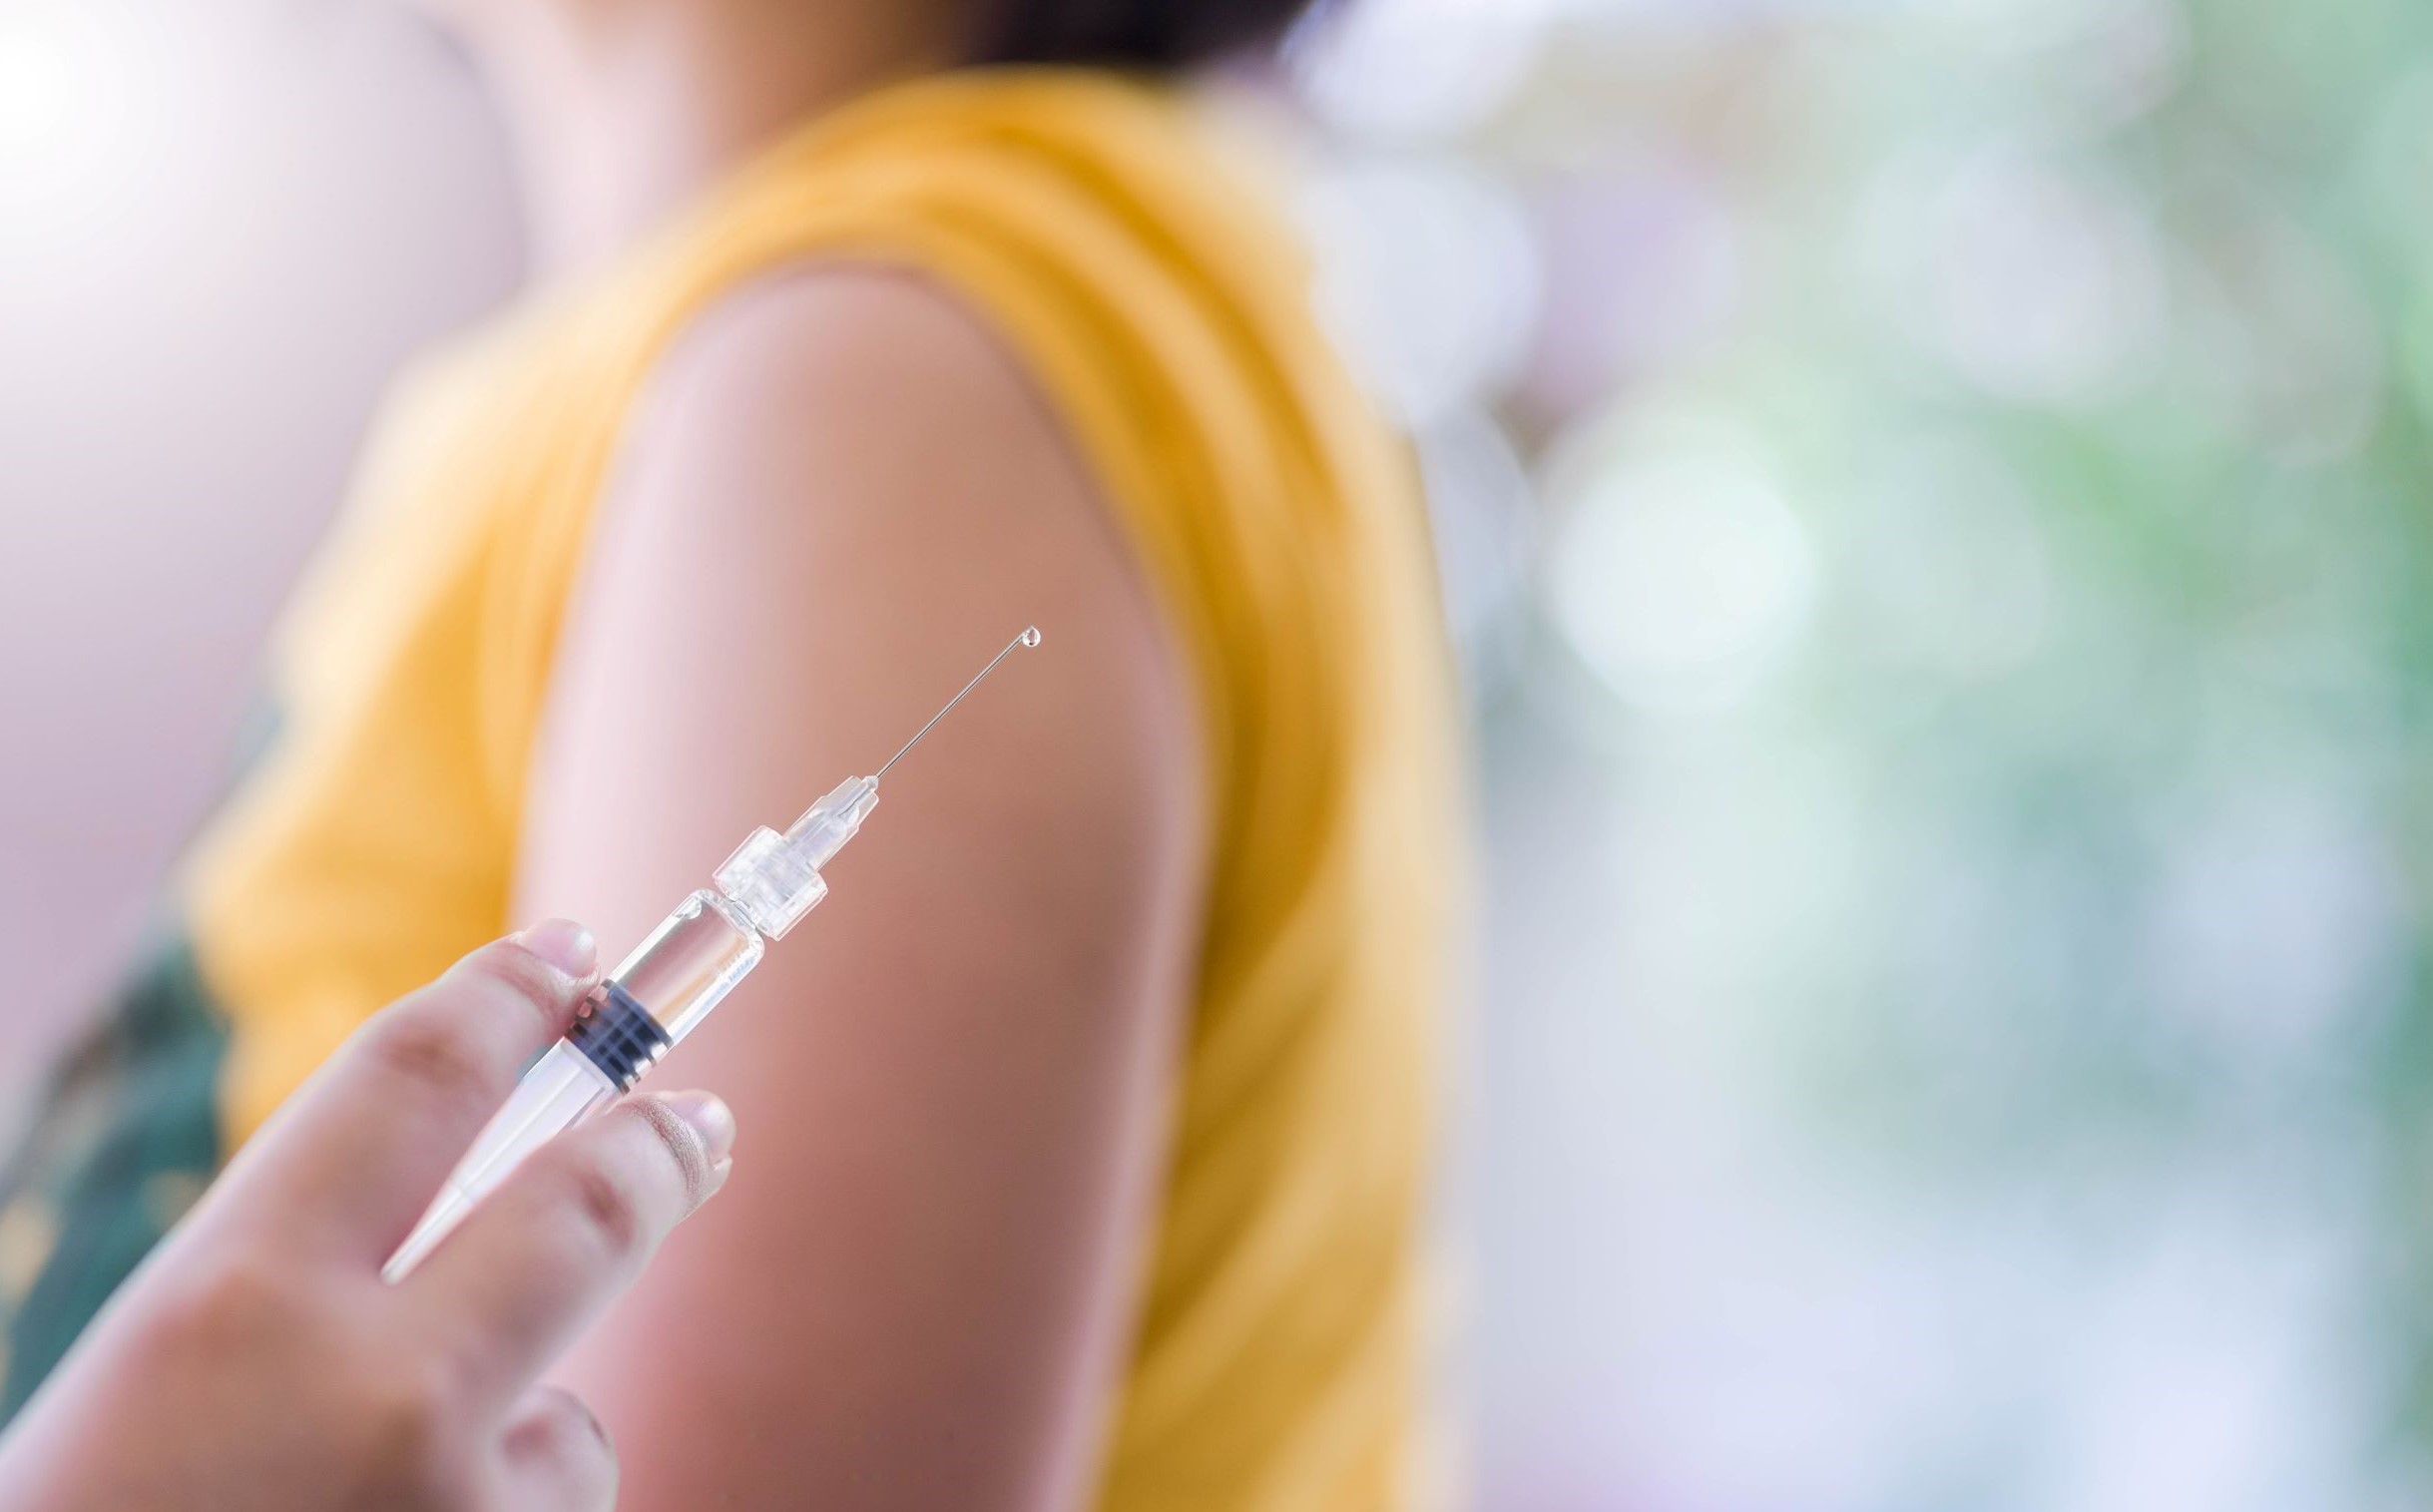 Blurry image of woman's arm with vaccination in foreground.